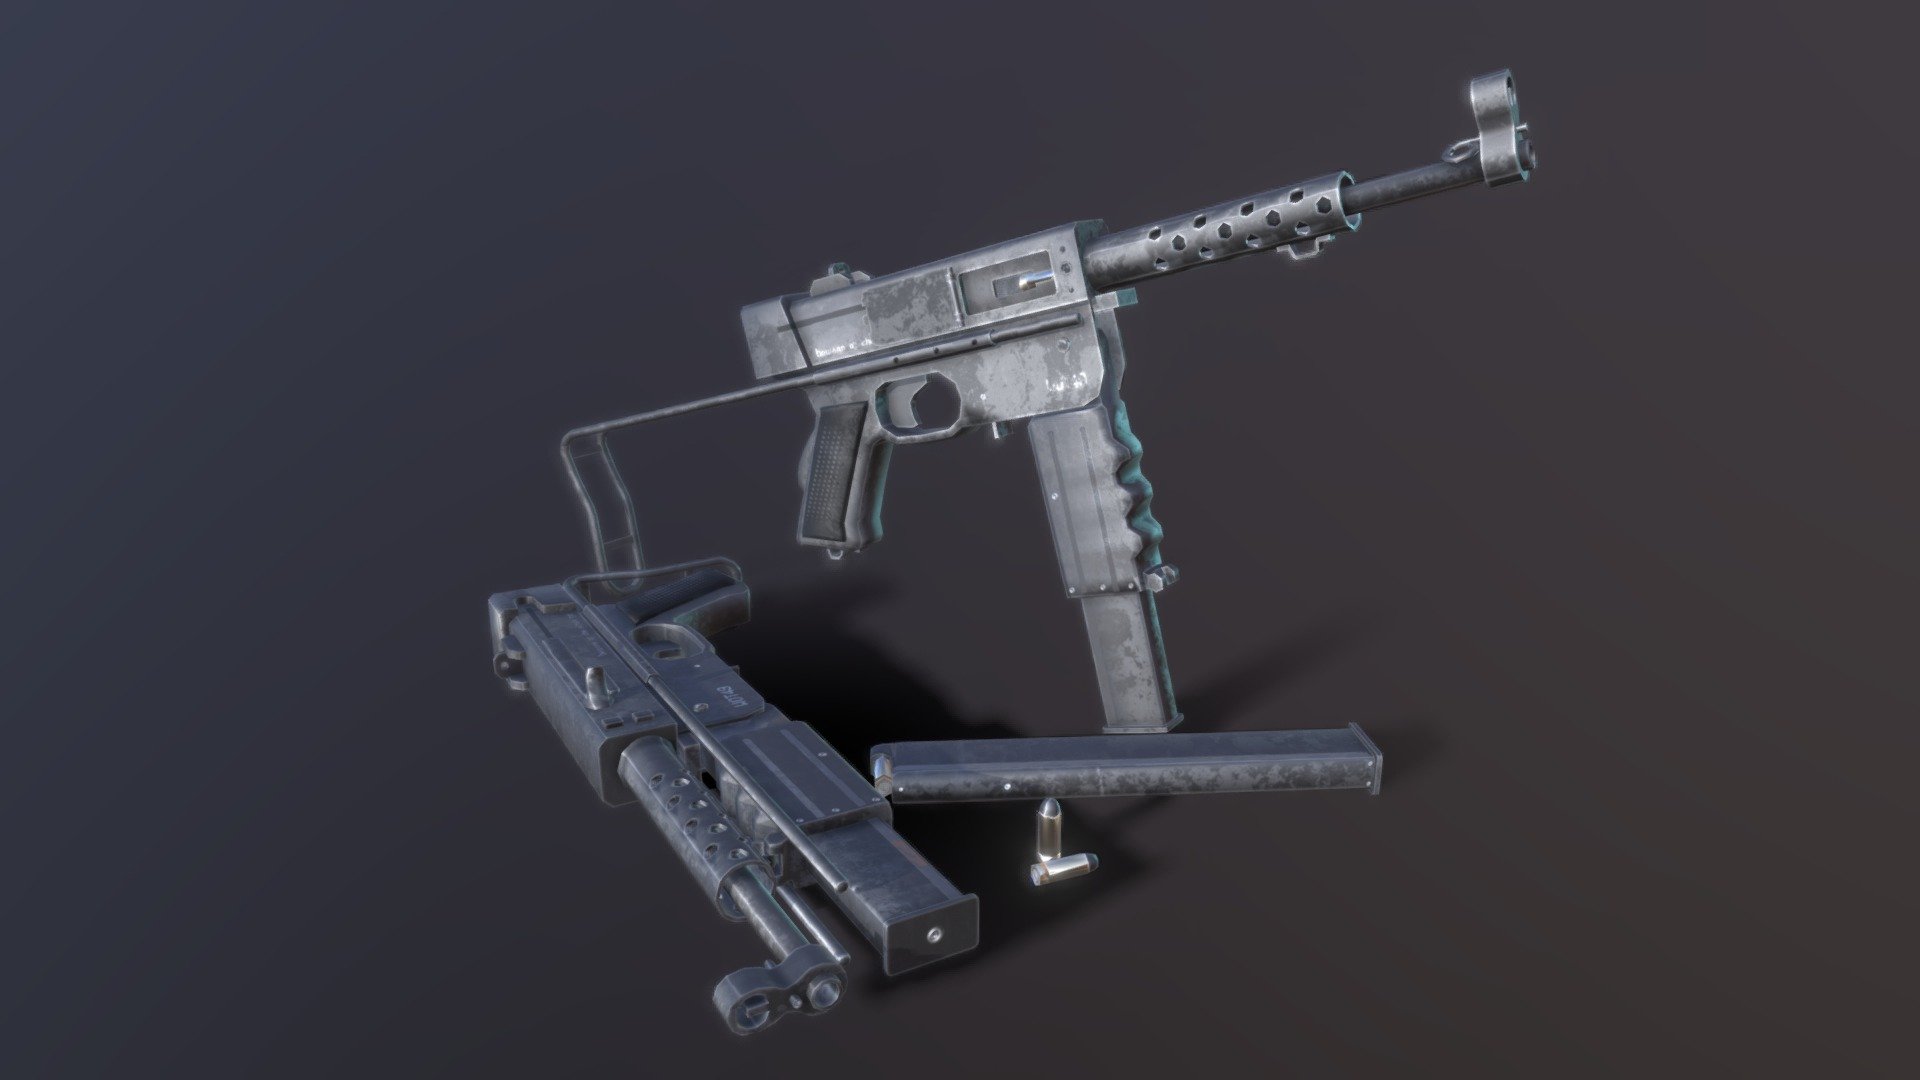 The MAT 49 (Manufactures d’armes de Tulle) is a french submachine gun used in the French Army form 1950 to1980. 
An exotic weapon not really known but quite original and intersesting in its way of folding.
- 3D Model close to the original but partially reinterpreted
- Proportions are partially respected compared to the original weapon
- Optimised for Game engine (Tested on Unity 3D)
- Some parts are separated from the main model for a better  3D animation usecase.

Made with Cinema4D
Textured with ArmorPaint

//////////////// Model informations ////////////////




Points : 7385

Polygons : 7268

Objects: 23

One material made of 4 Textures (20482048 px) for all the model  (Albedo (base), Normal, Metal, Rough*)
 - MAT 49 : French Submachine-gun - 3D model by Gwenaël Hervé (@Gwenael_Herve) 3d model